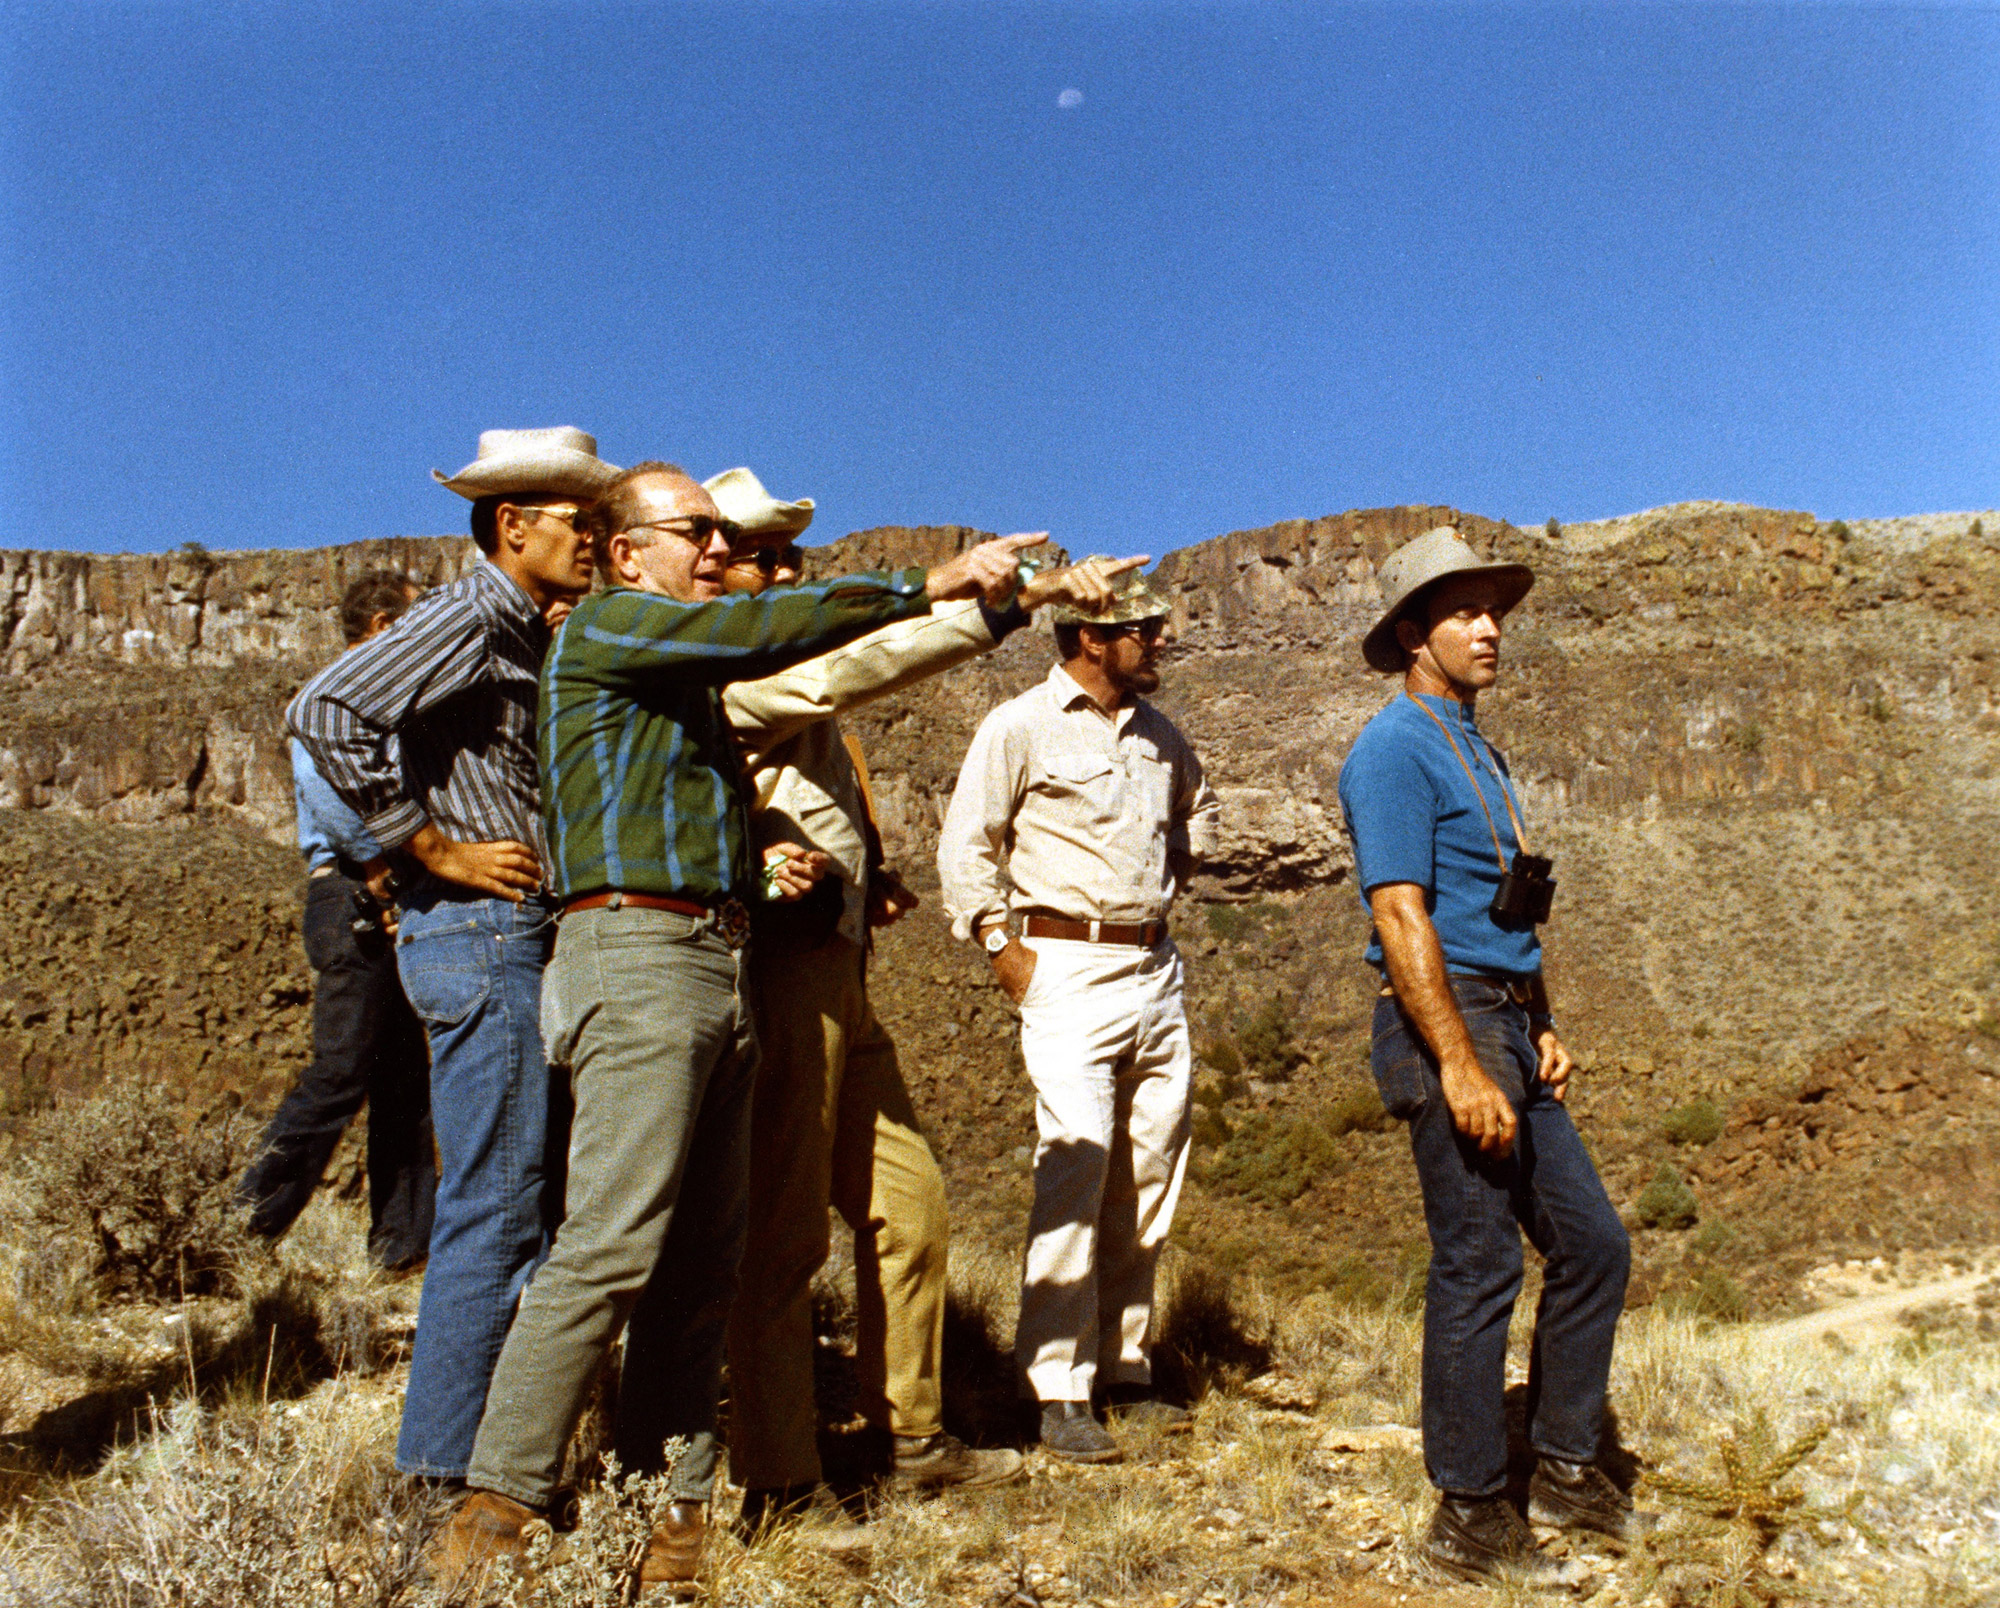 Lee Silver points out some geological observations to his astro-geologists in training, Charlie Duke and John Young. Credit: NASA/U.S. Geological Survey via Retro Space Images